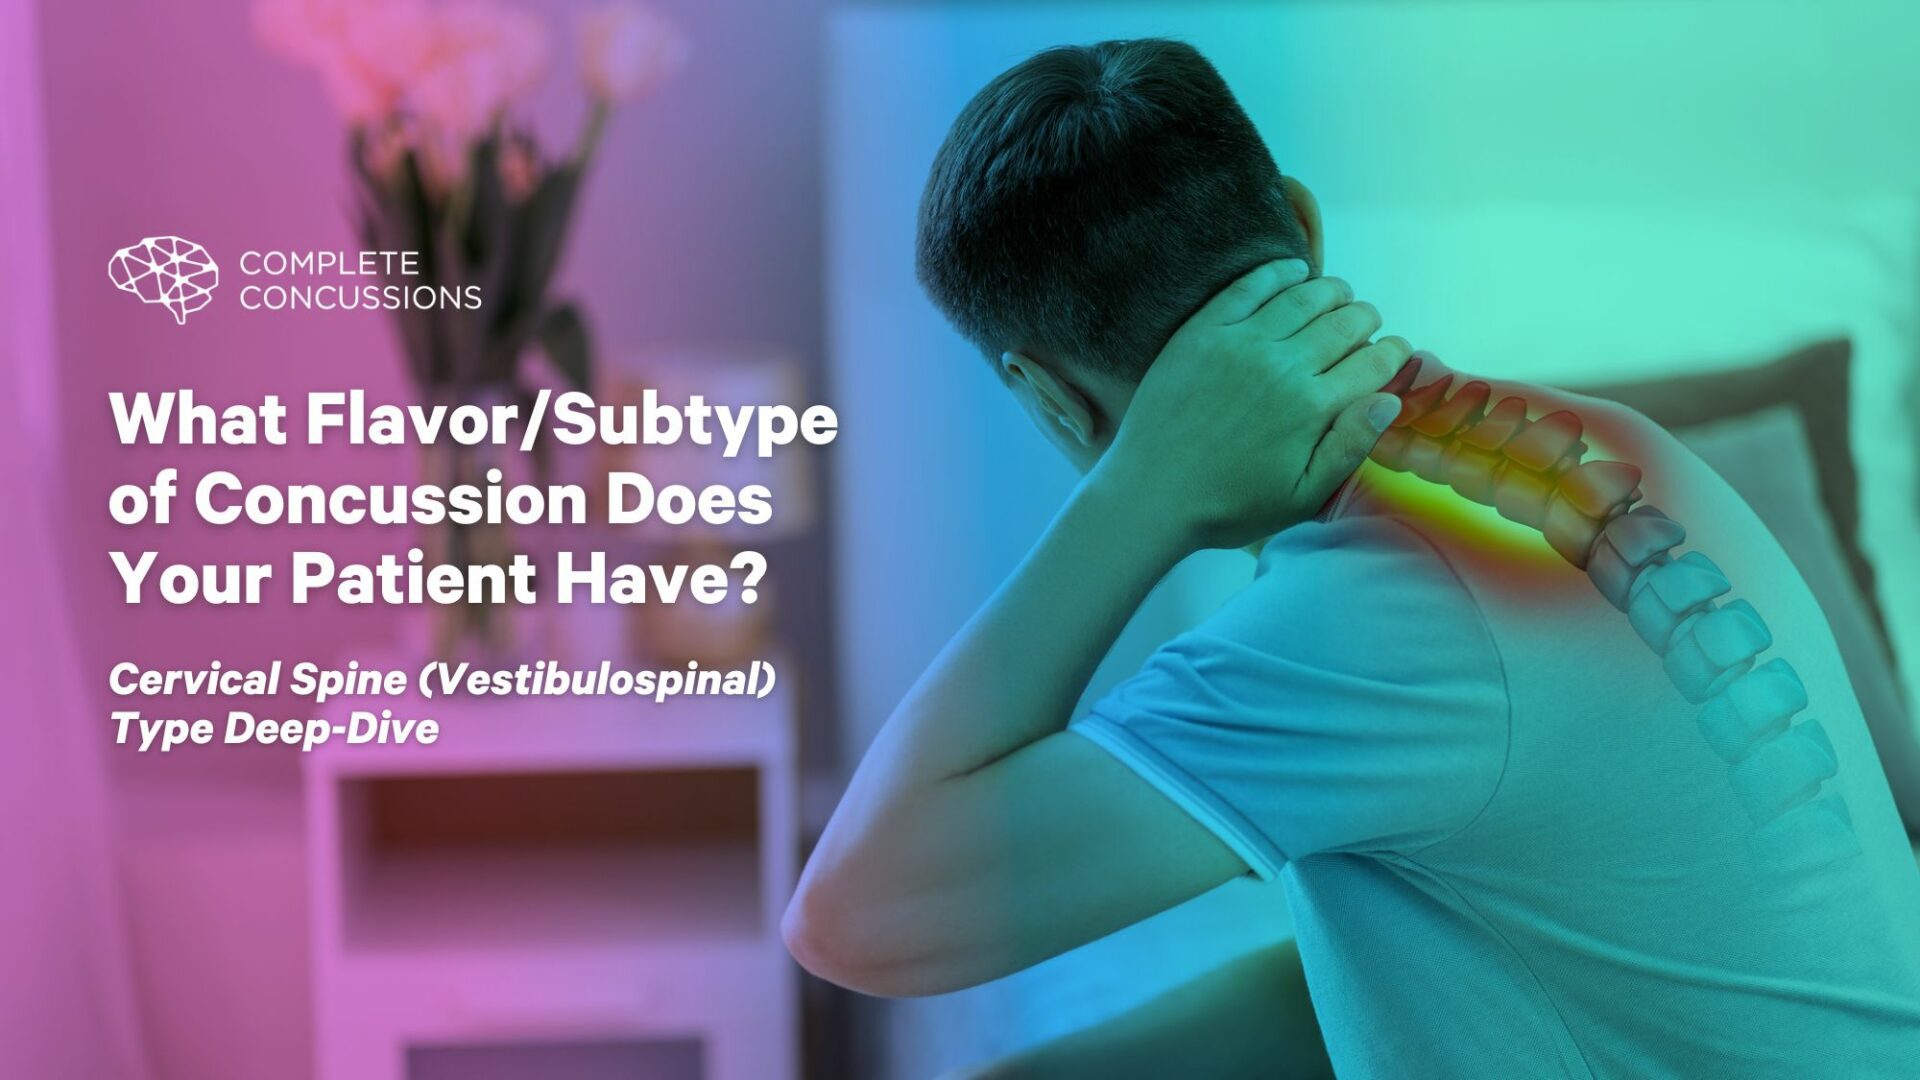 What Flavor/Subtype of Concussion Does Your Patient Have? Cervical Spine (Vestibulospinal) Type Deep-Dive